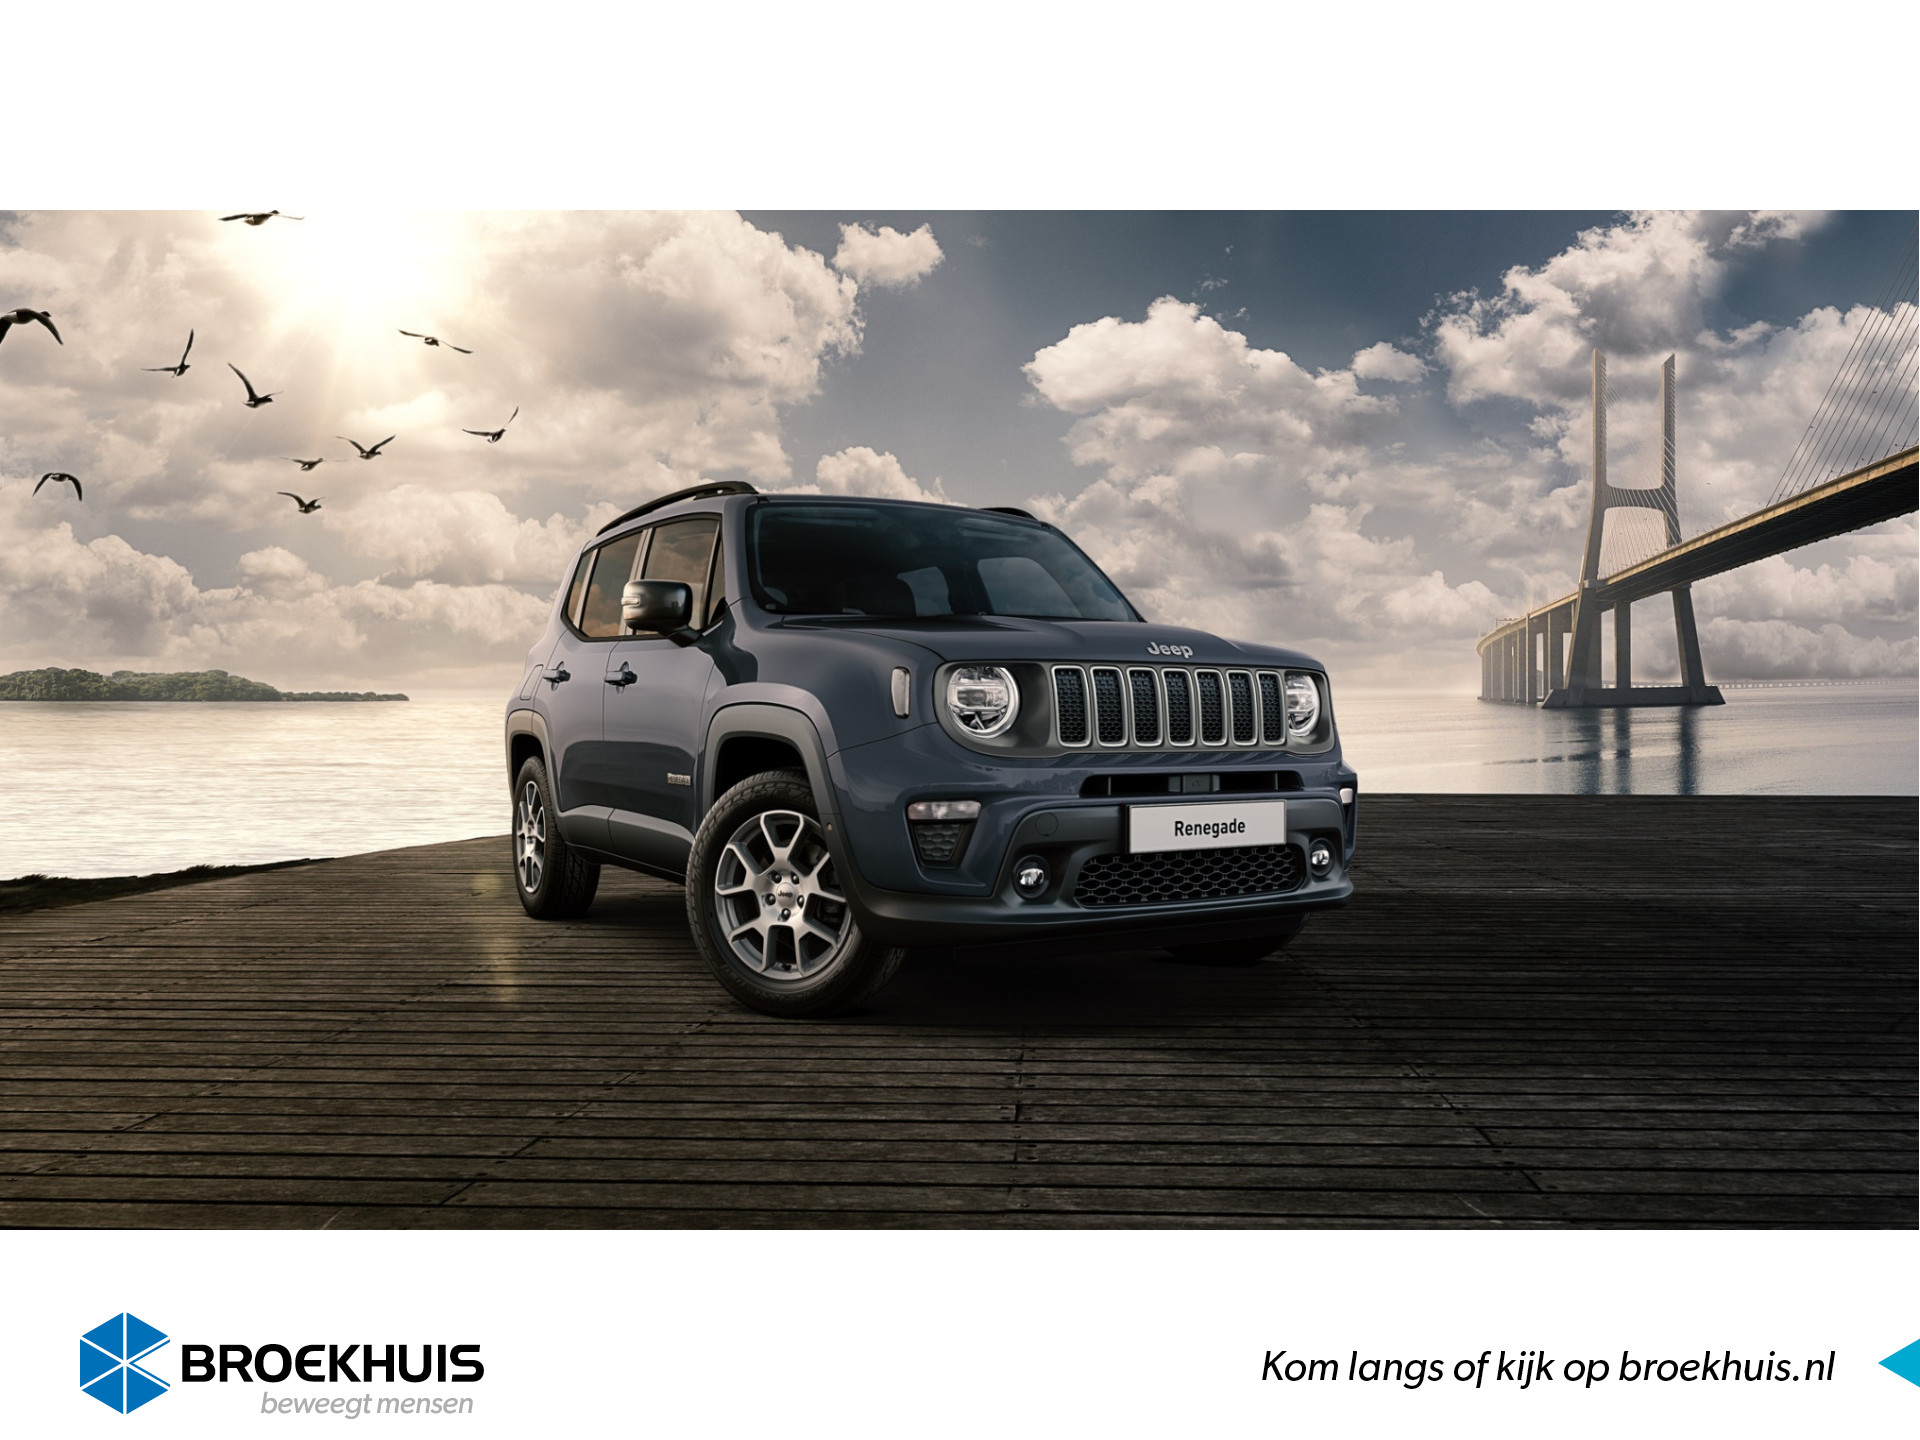 Jeep Renegade 1.5T 130 pk Automaat e-Hybrid Limited | Registratiekorting  €5.143 | Convenience Pack | Style Pack |  Visibility Pack | Uconnect™ LIVE-infotainmentsysteem met 8,4-inch Touchscreen, Navigatie en Bluetooth